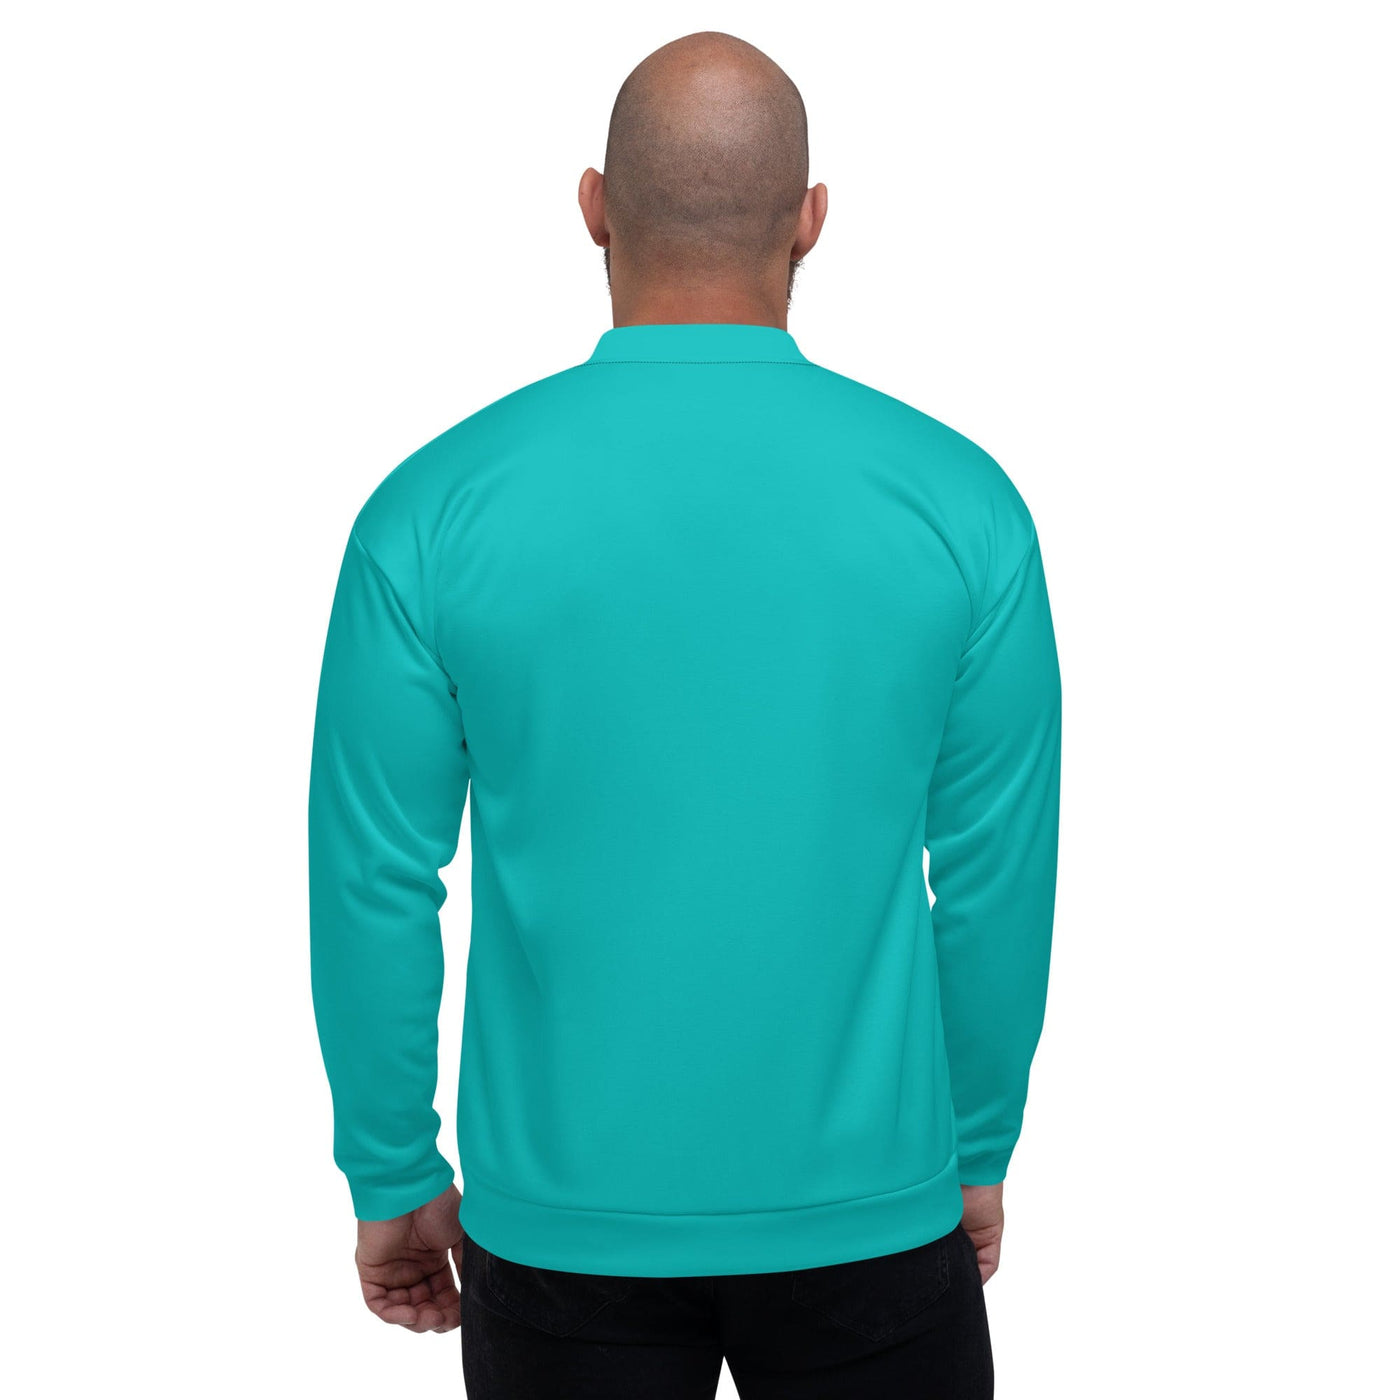 Bomber Jacket For Men Teal Green - Mens | Jackets | Bombers